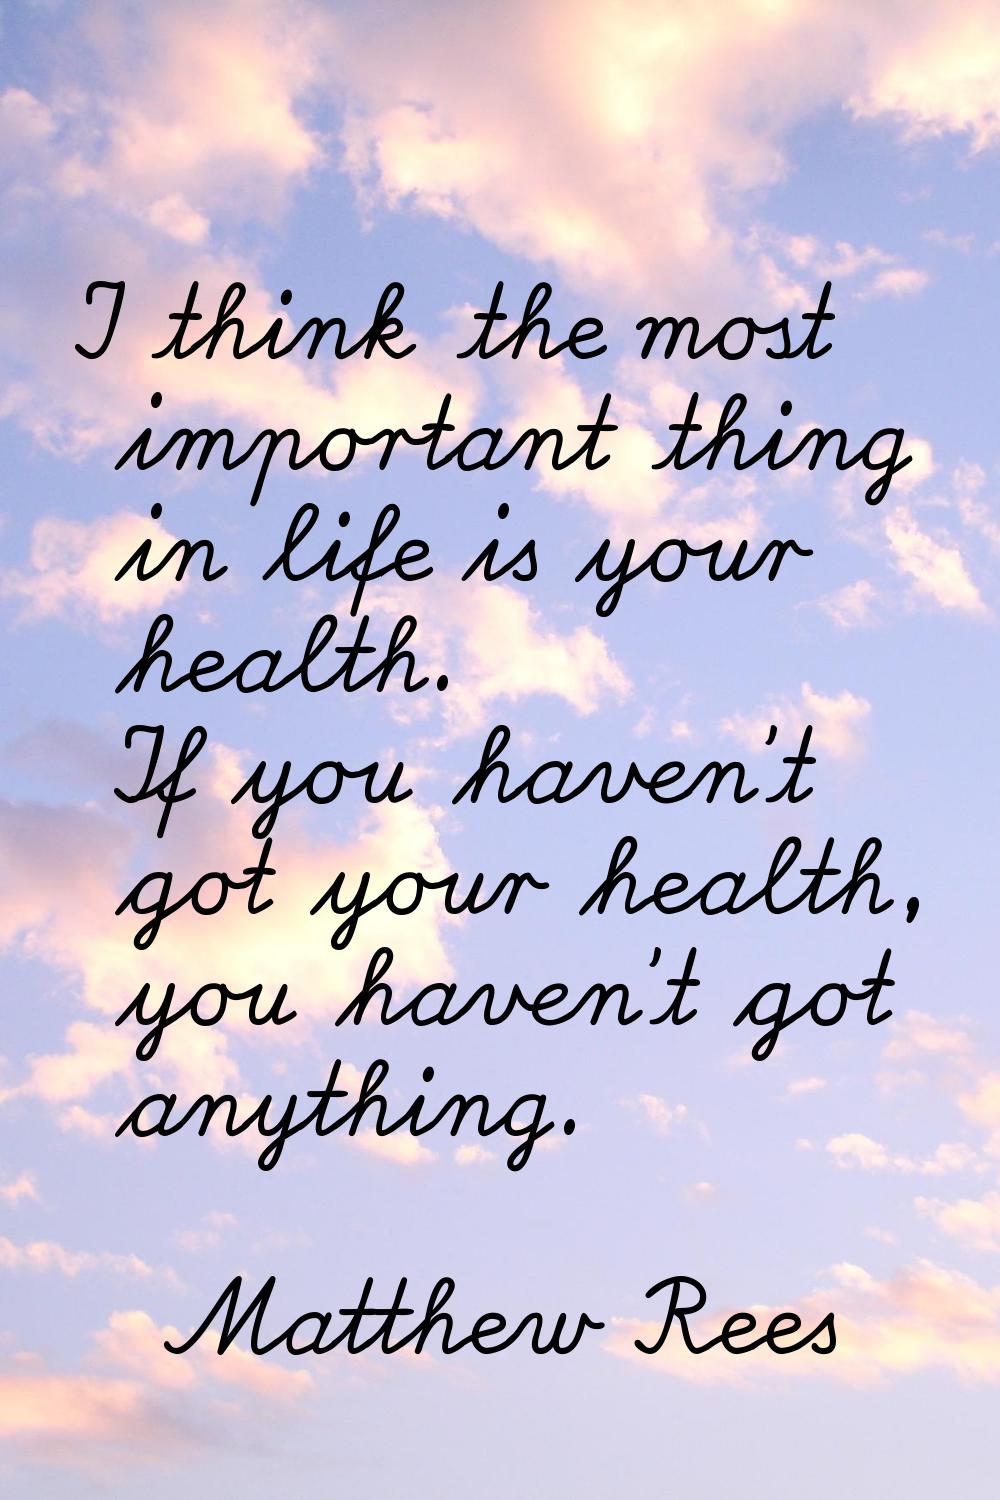 I think the most important thing in life is your health. If you haven't got your health, you haven'